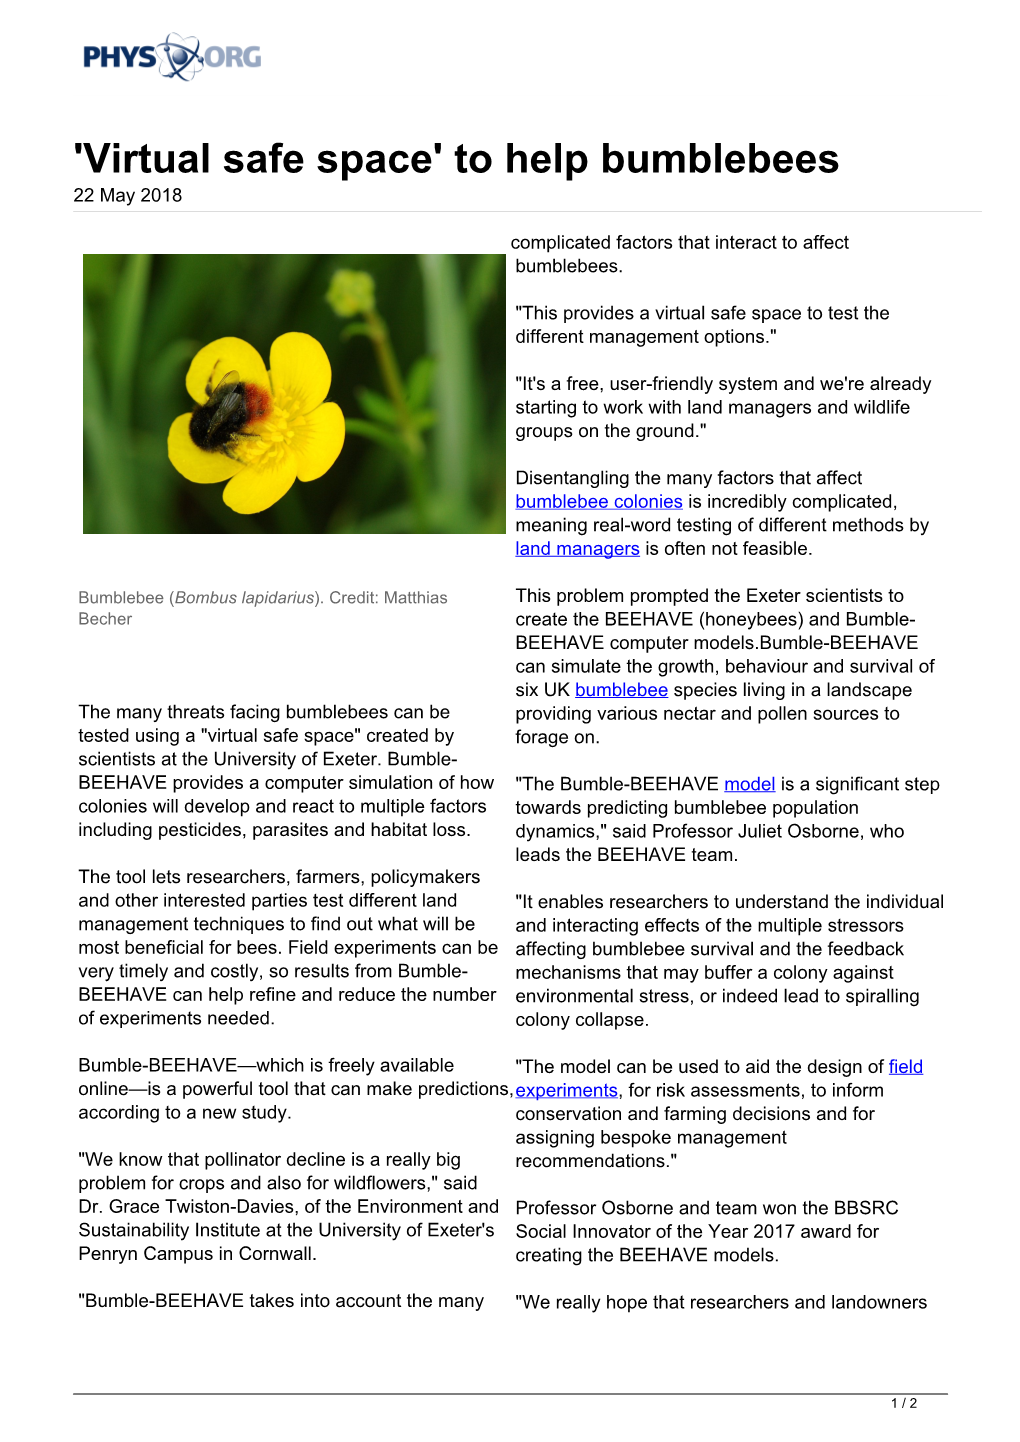 'Virtual Safe Space' to Help Bumblebees 22 May 2018